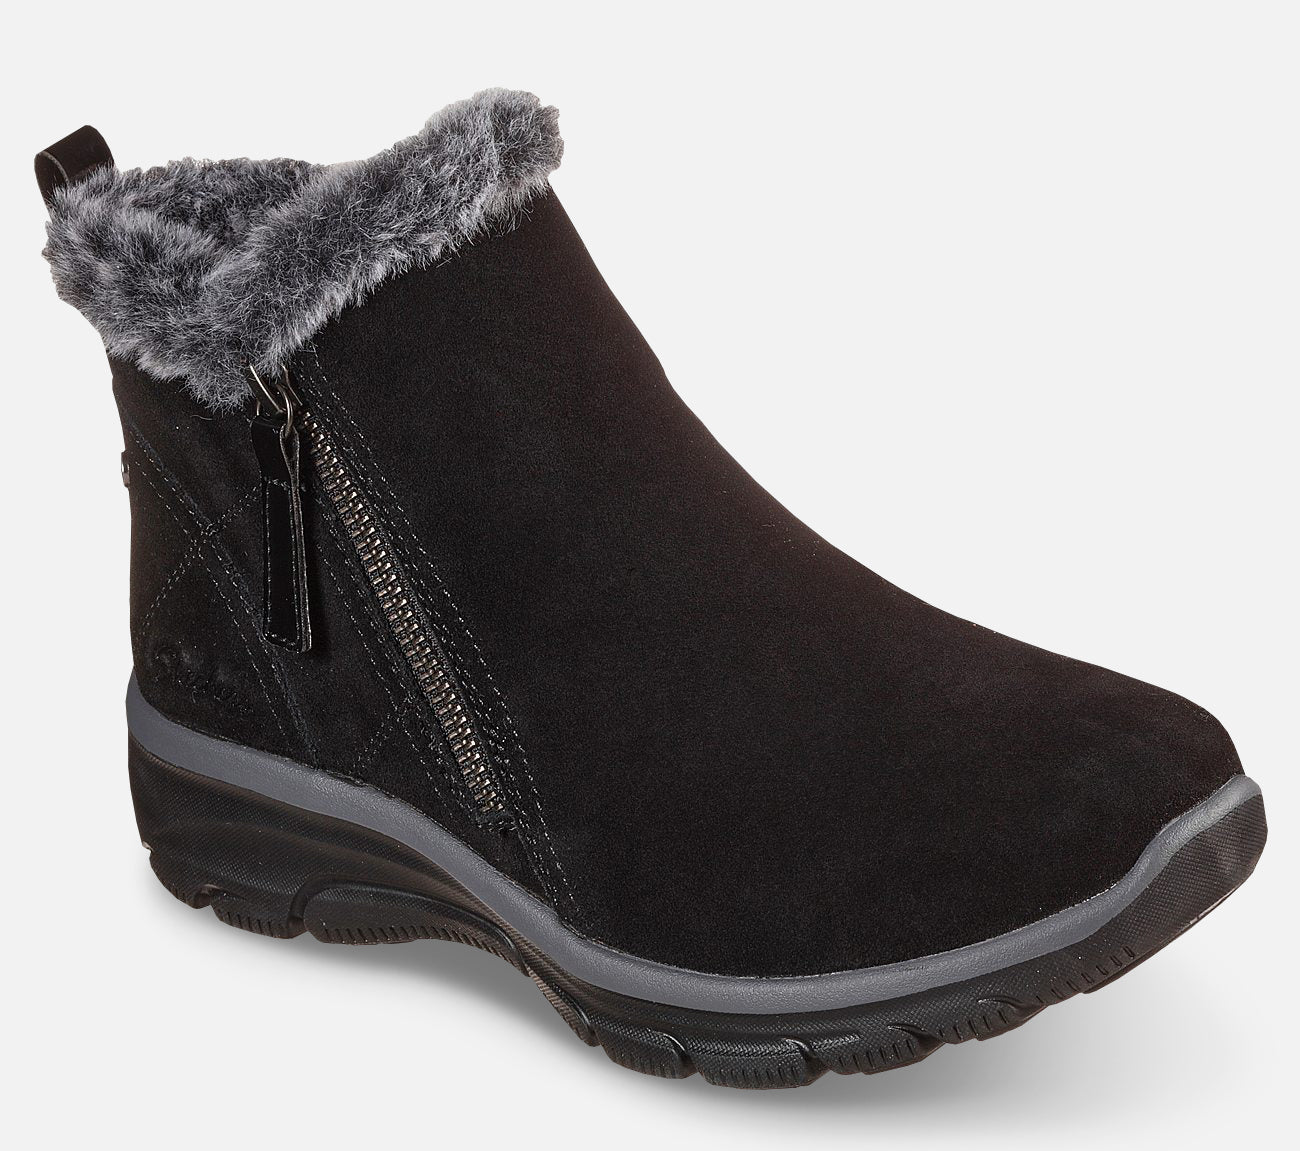 Relaxed Fit Easy Going - High Zip Boot Skechers